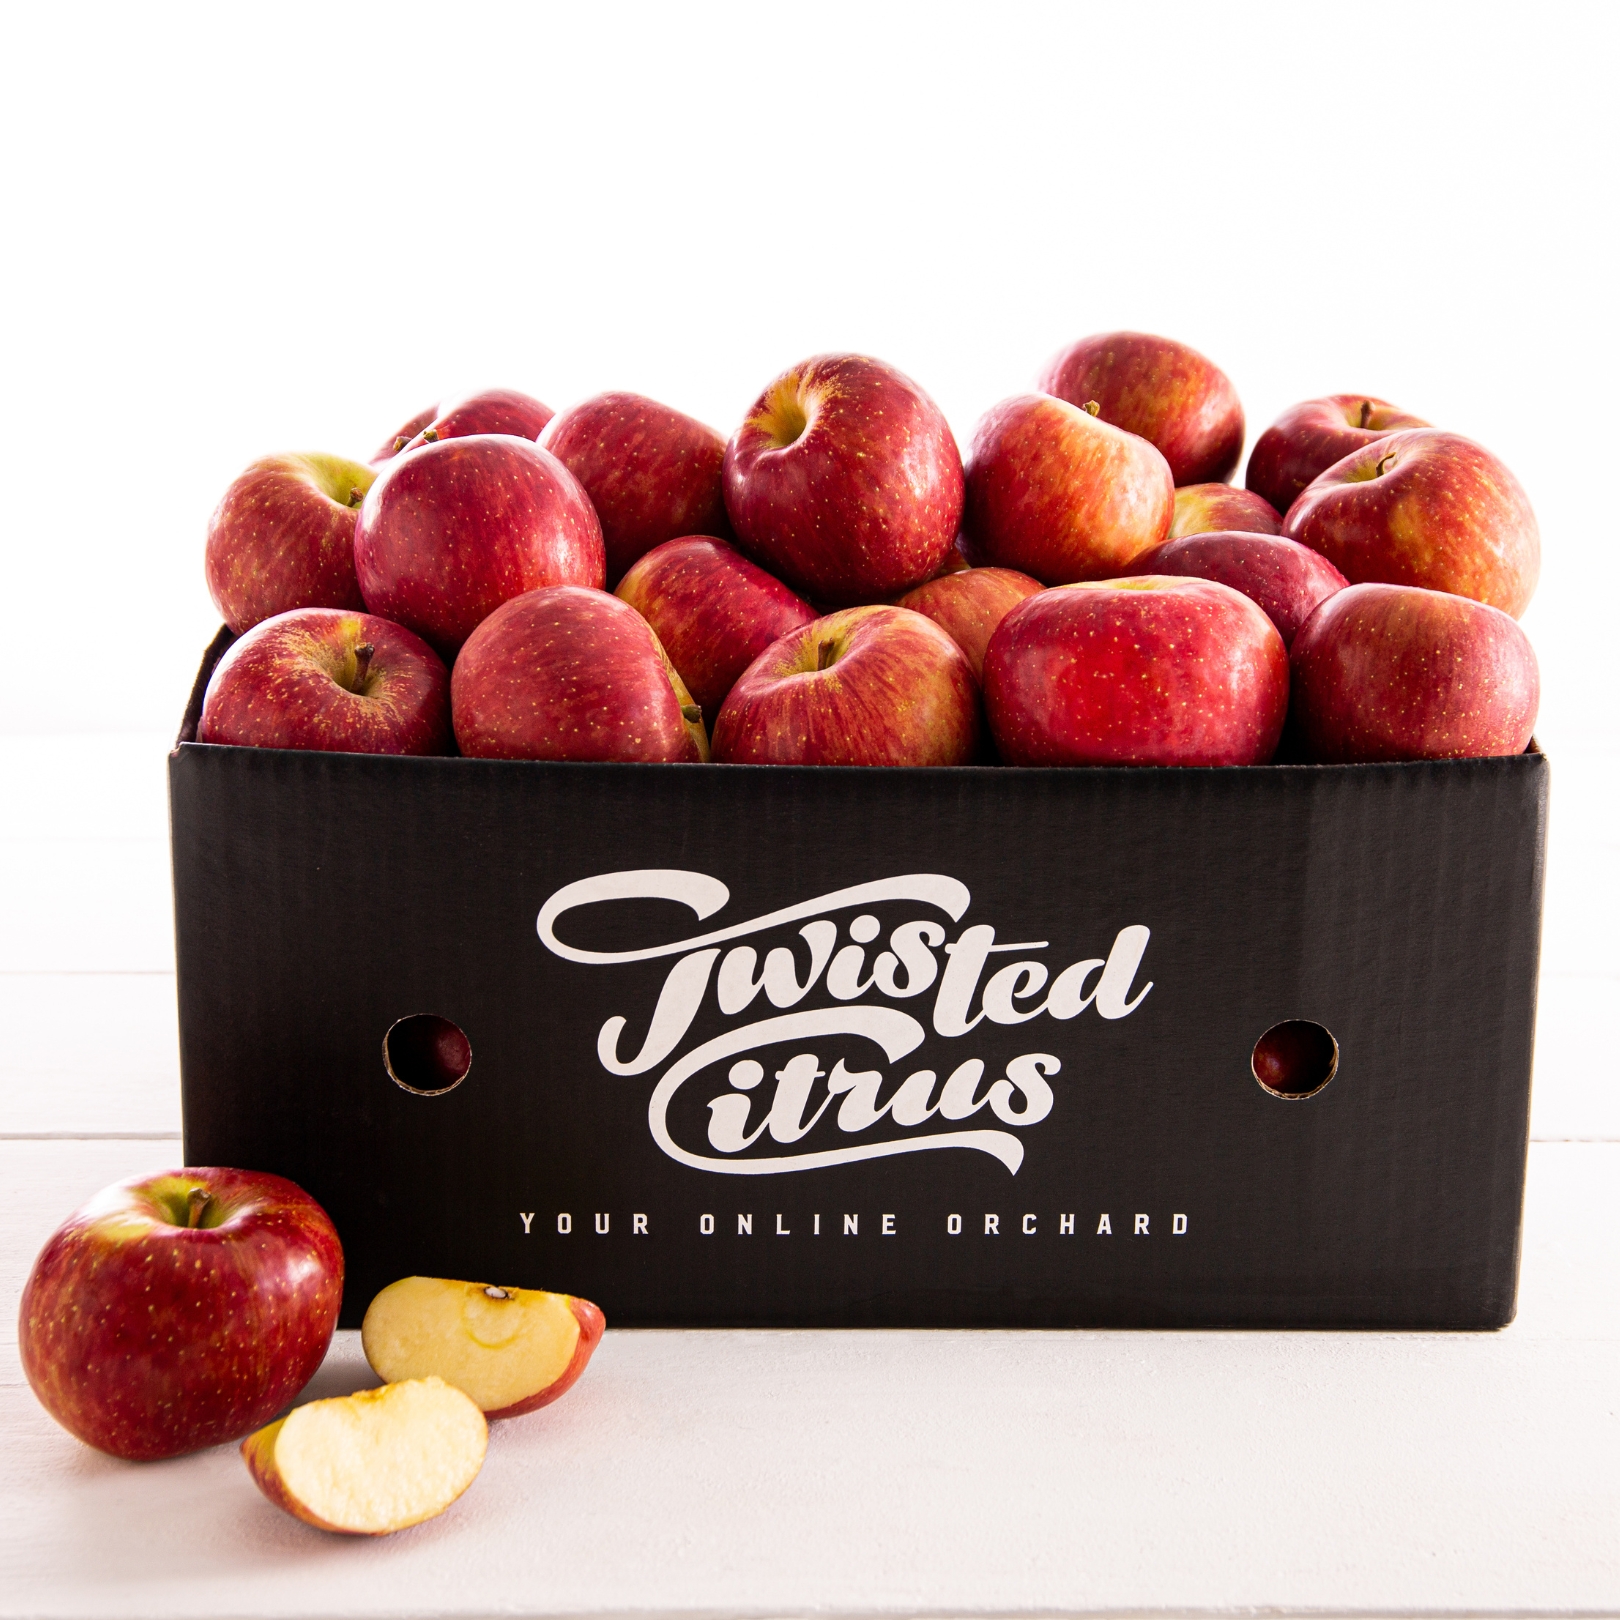 Apples - Fuji fruit box delivery nz